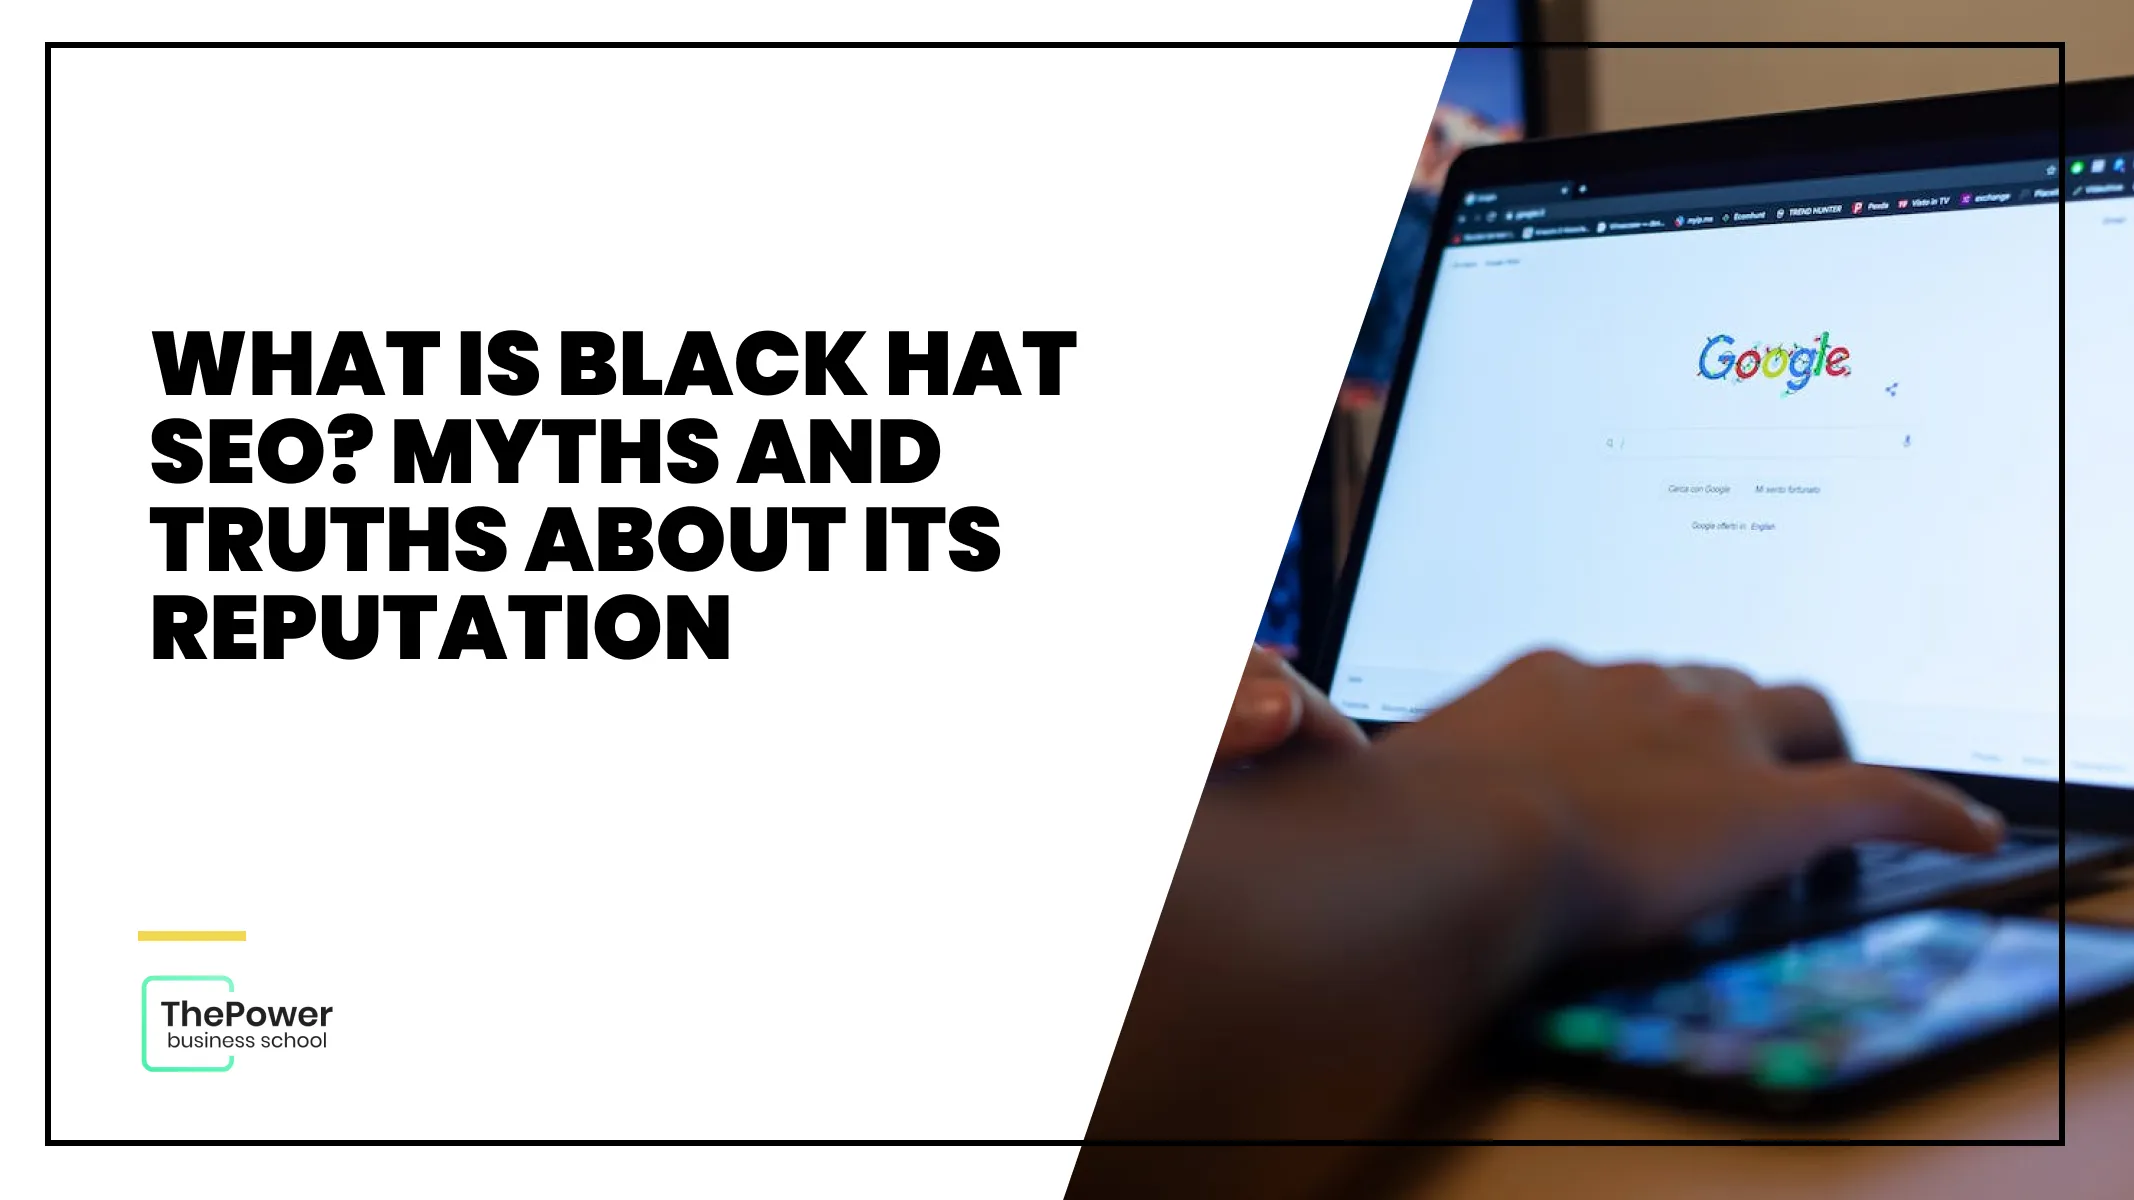 What is Black Hat SEO? Myths and truths about its reputation